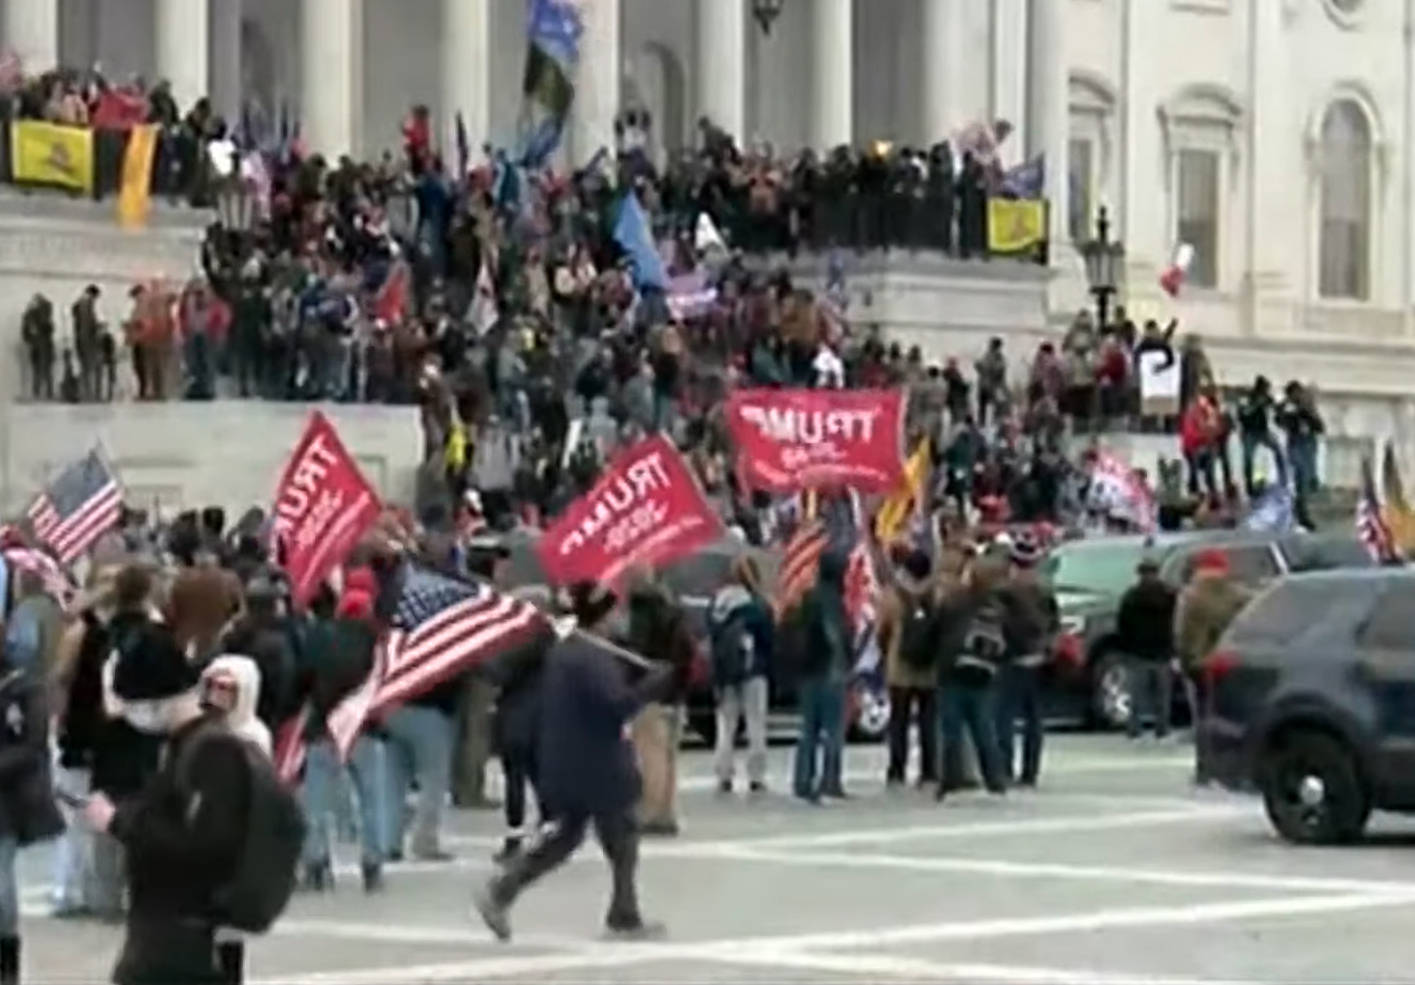 Screenshot from a YouTube stream of the Jan. 6, 2021, protest at the U.S. Capitol Building in Washington, D.C.